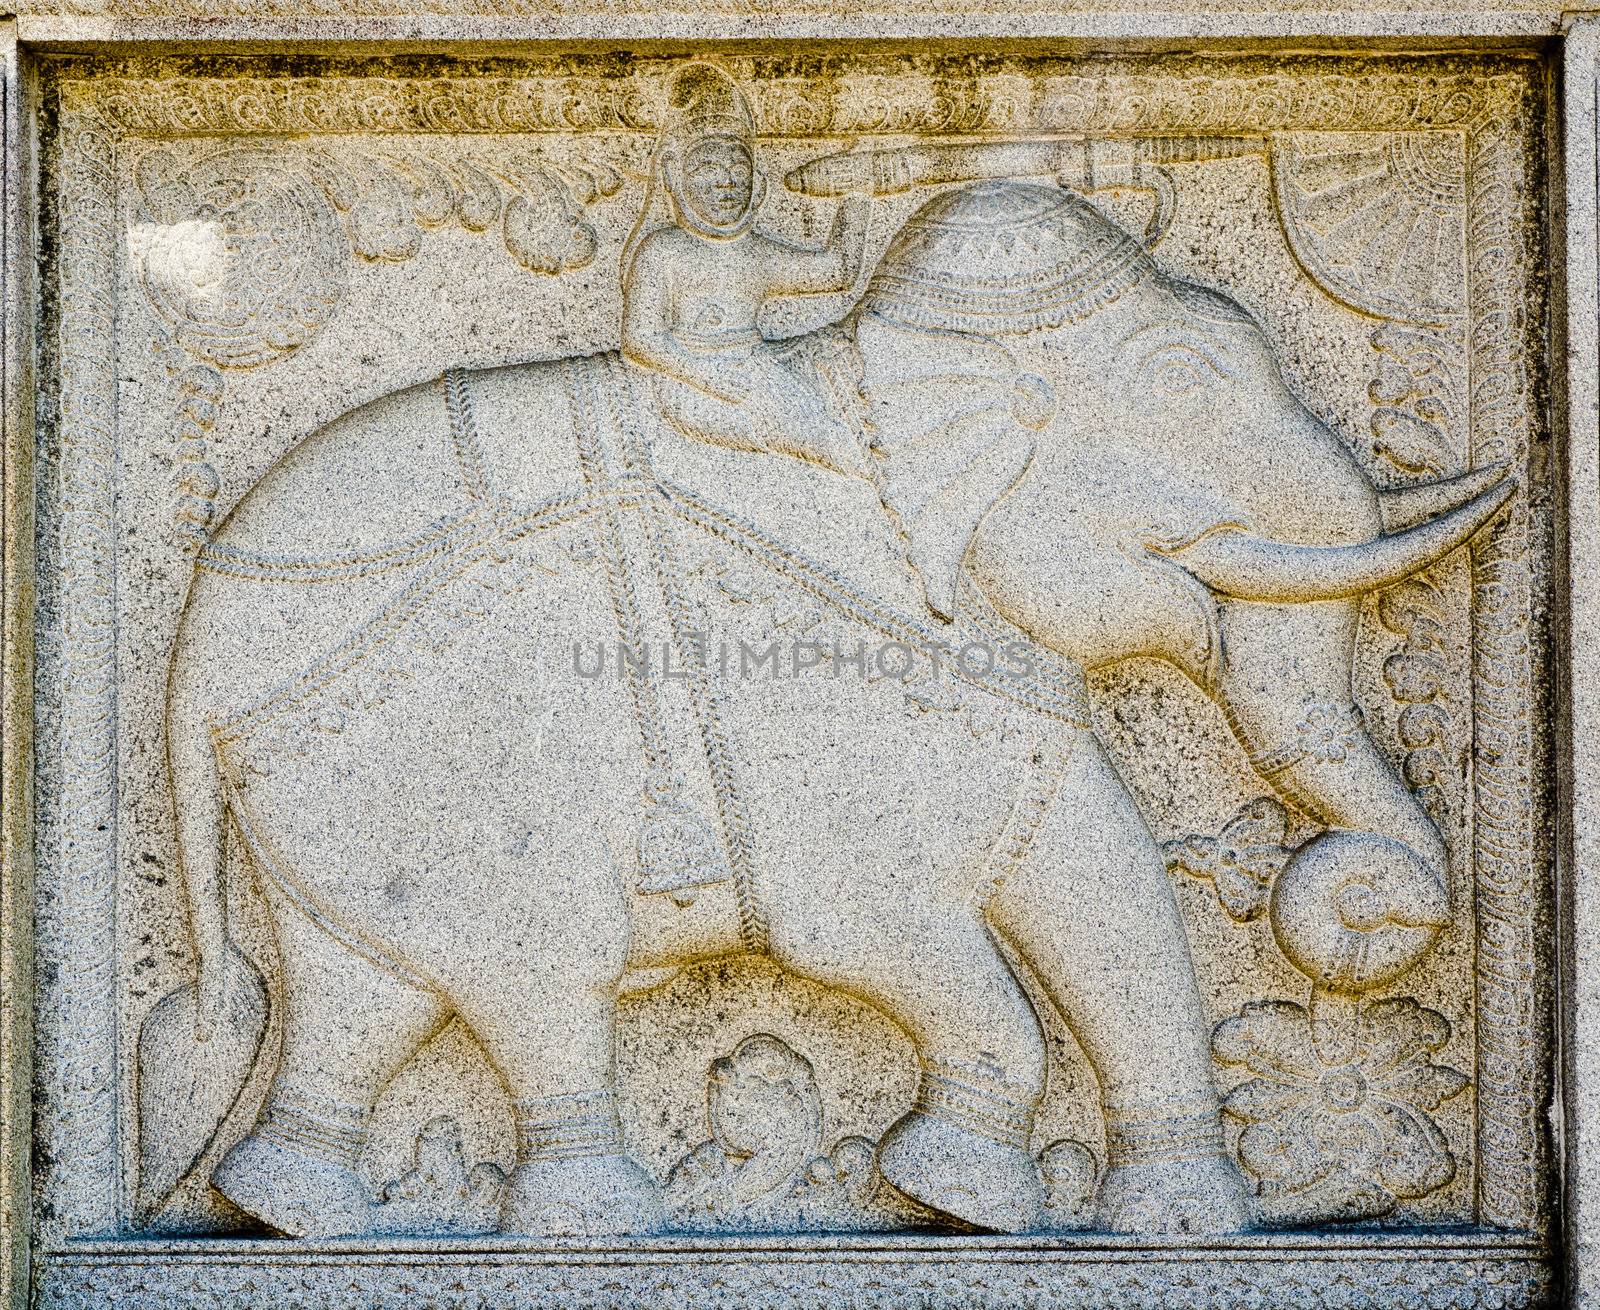 bas-relief on the stone with the figure of an elephant. Part of the decoration , temple of the tooth of the Buddha in Kandy, Sri Lanka